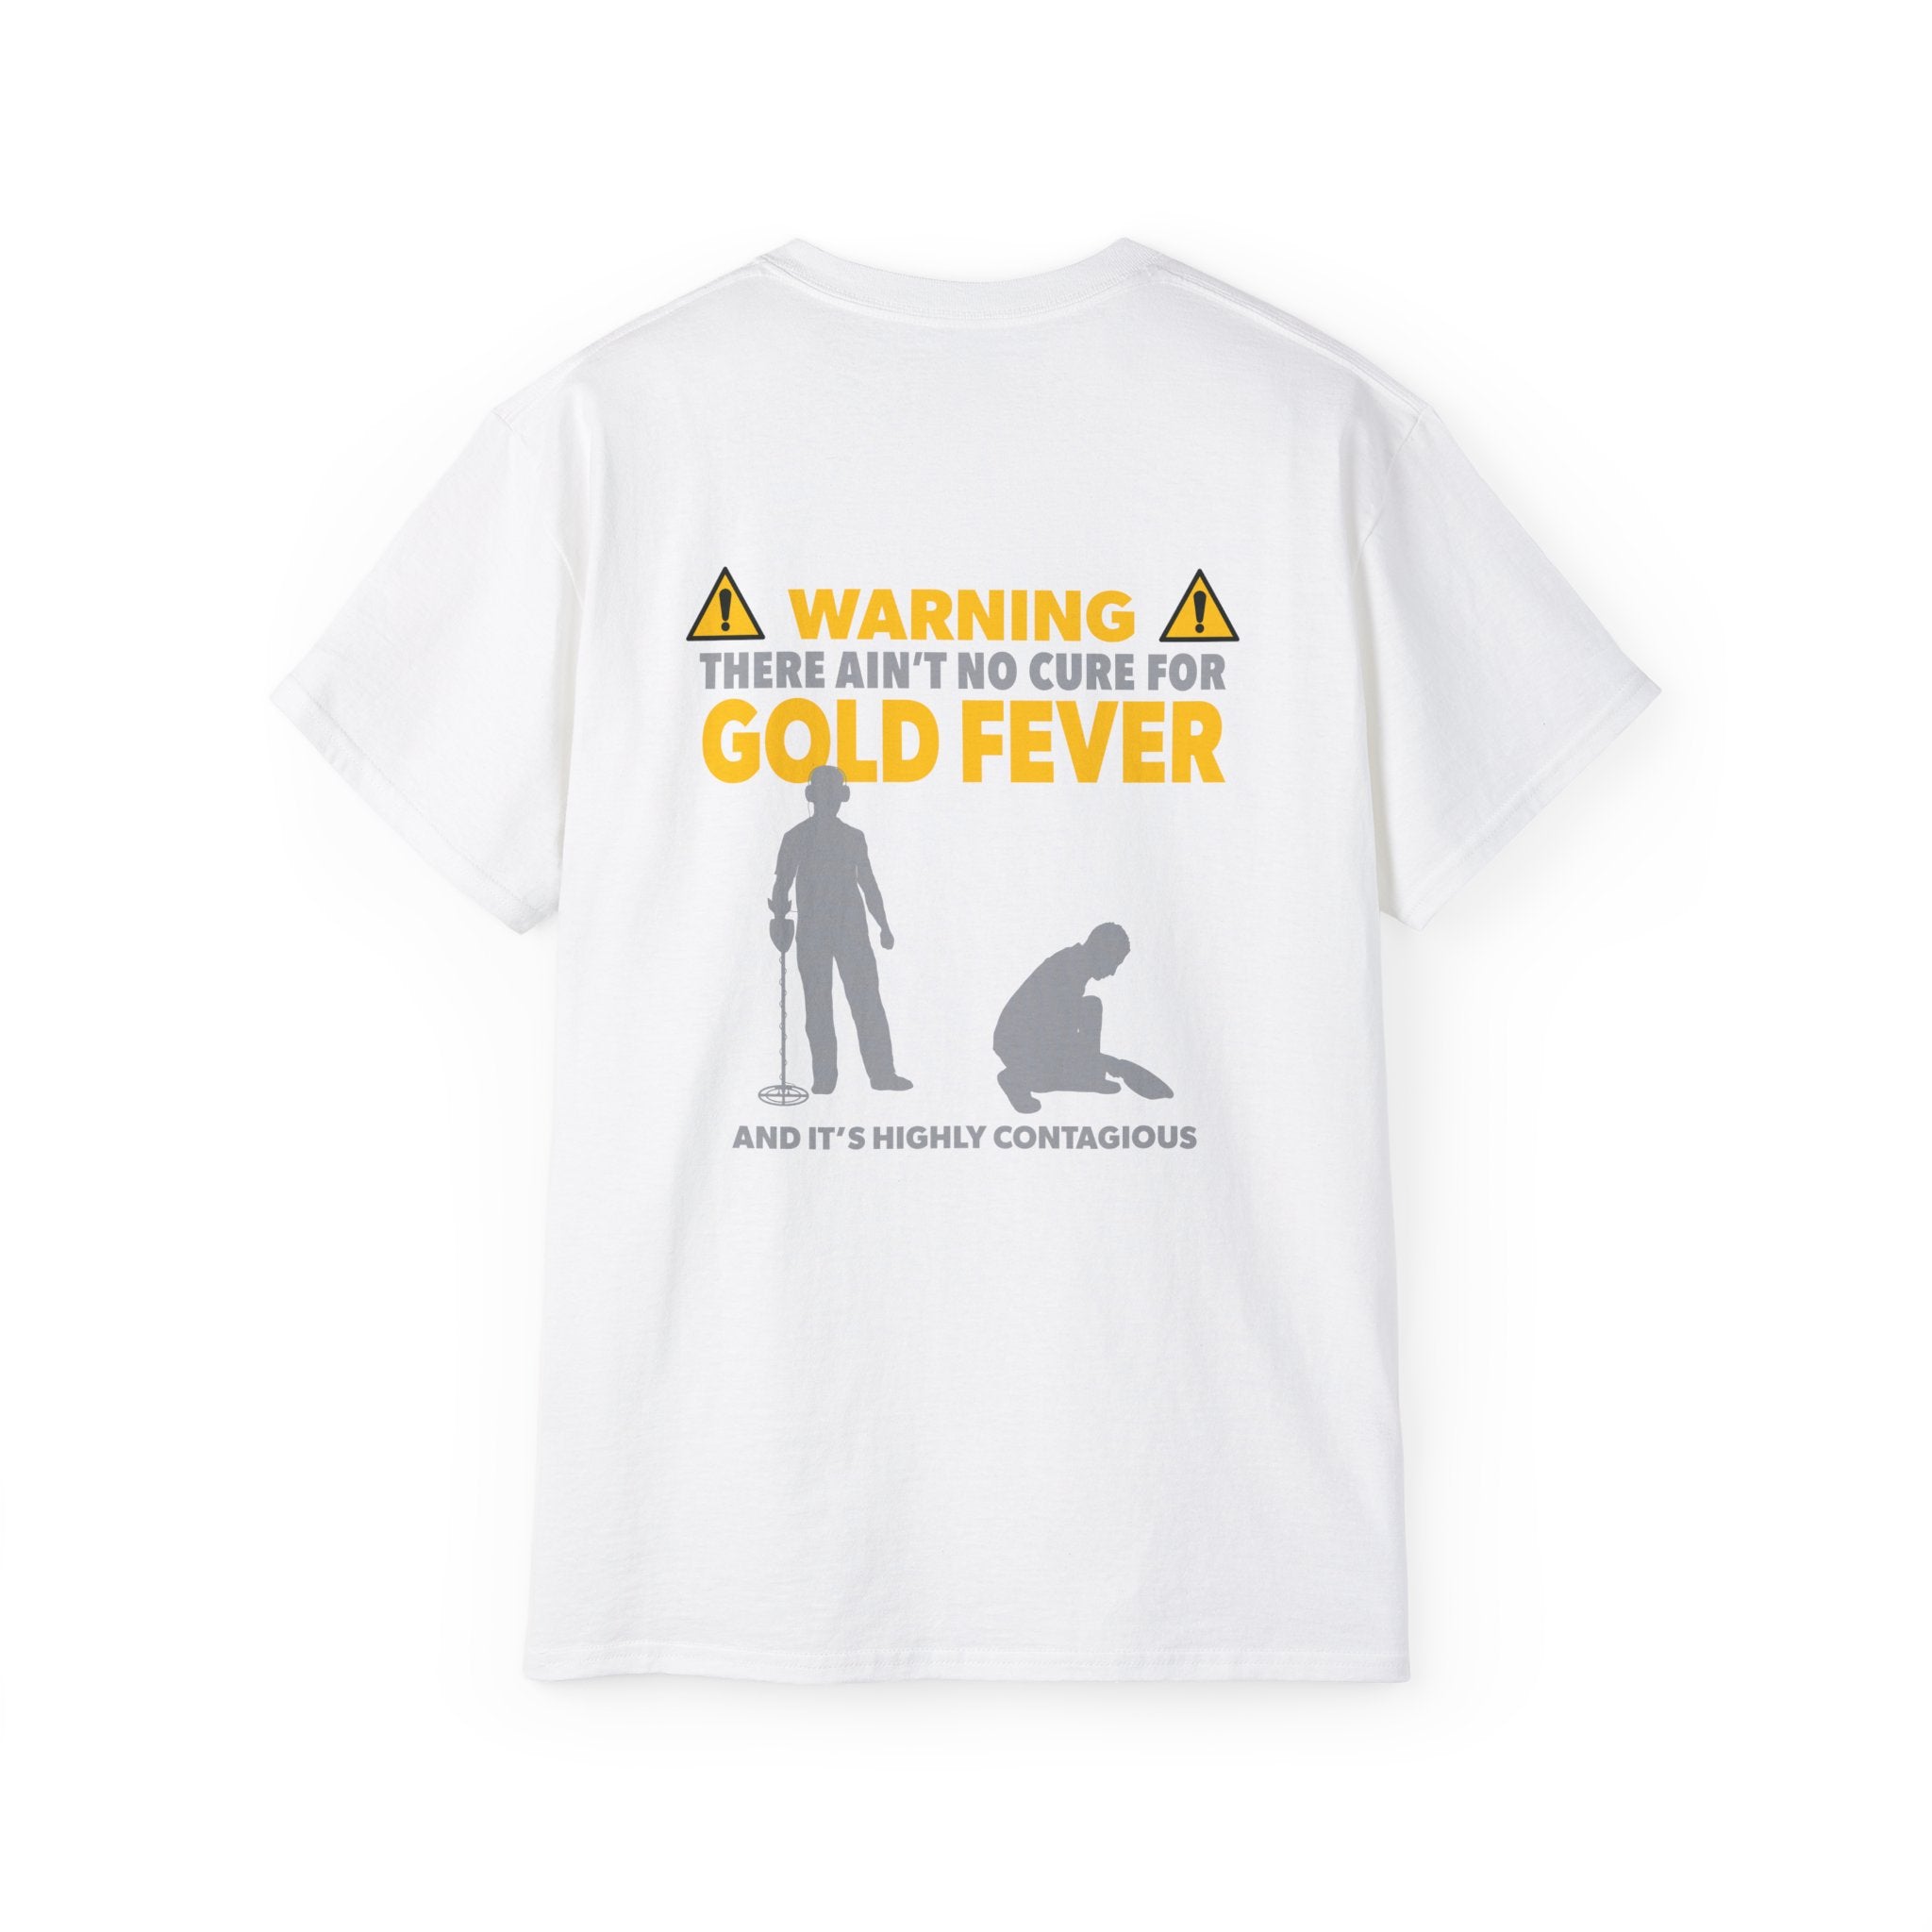 There Ain't No Cure For Gold Fever T-Shirt